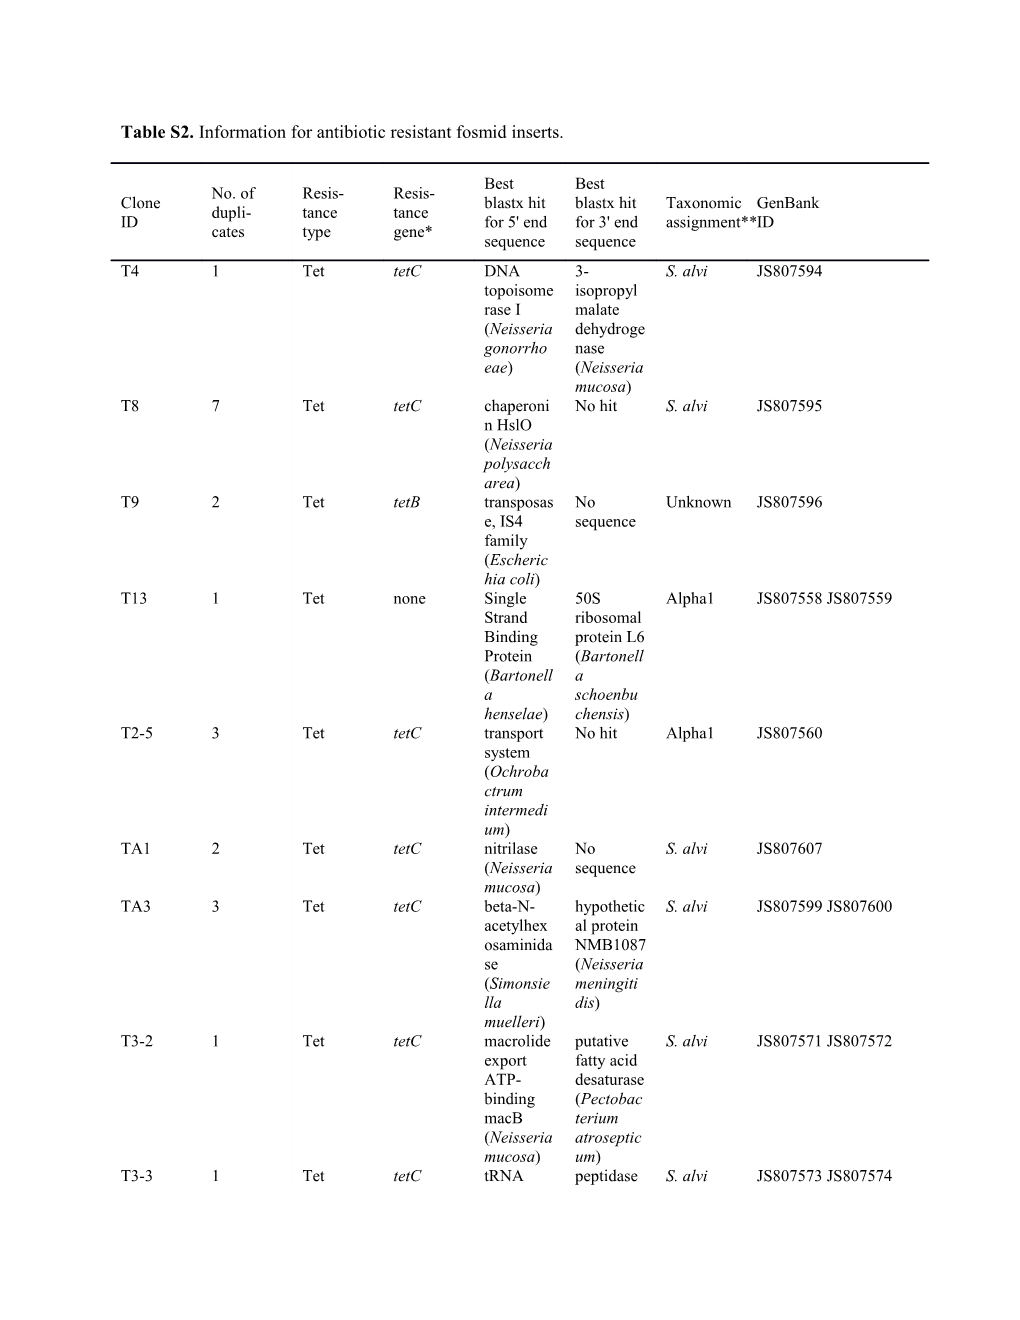 Table S2. Information for Antibiotic Resistant Fosmid Inserts